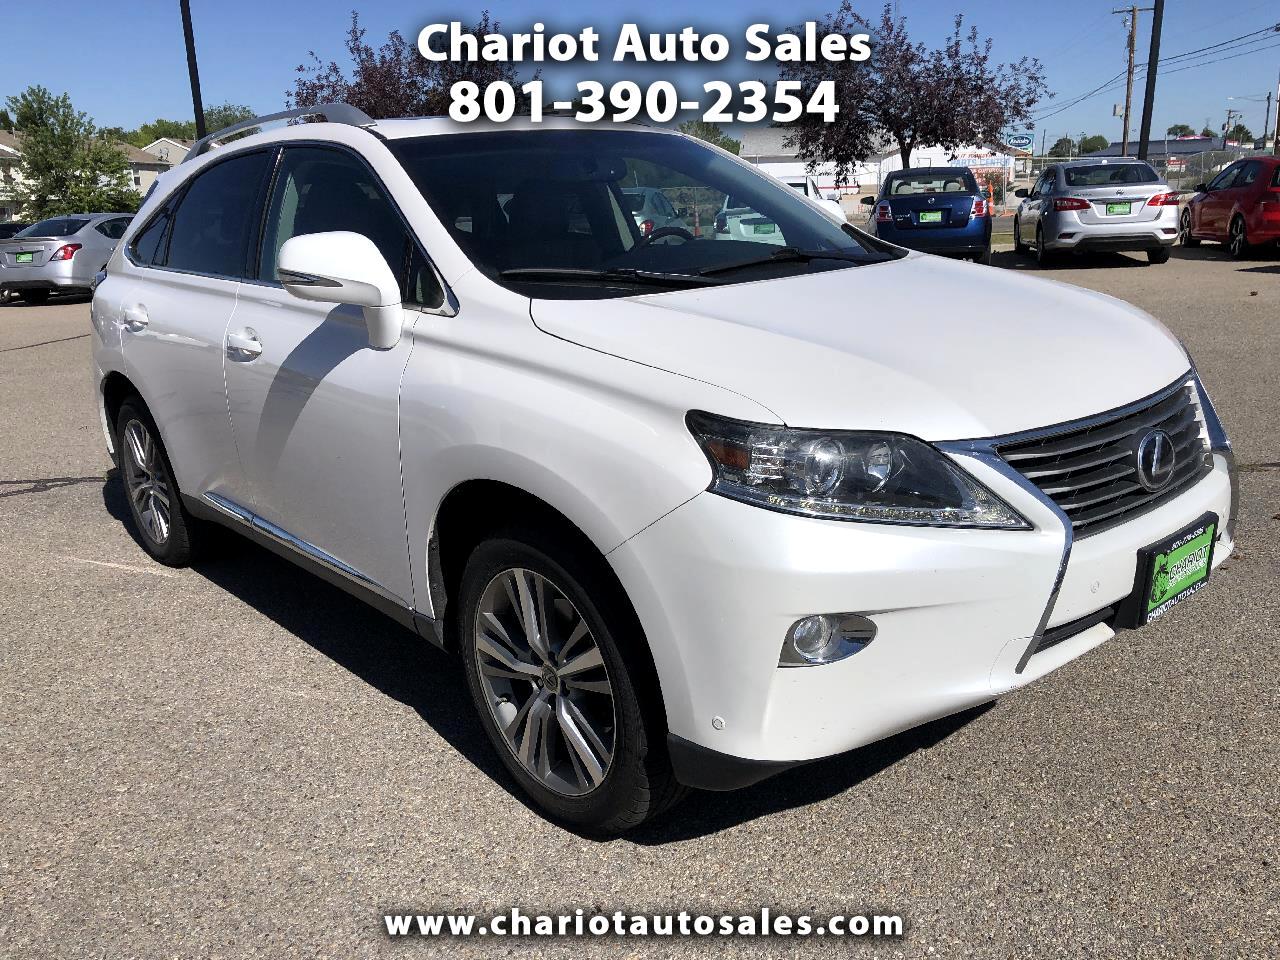 Used 2015 Lexus Rx 350 Awd For Sale In Clearfield Ut 84015 Chariot